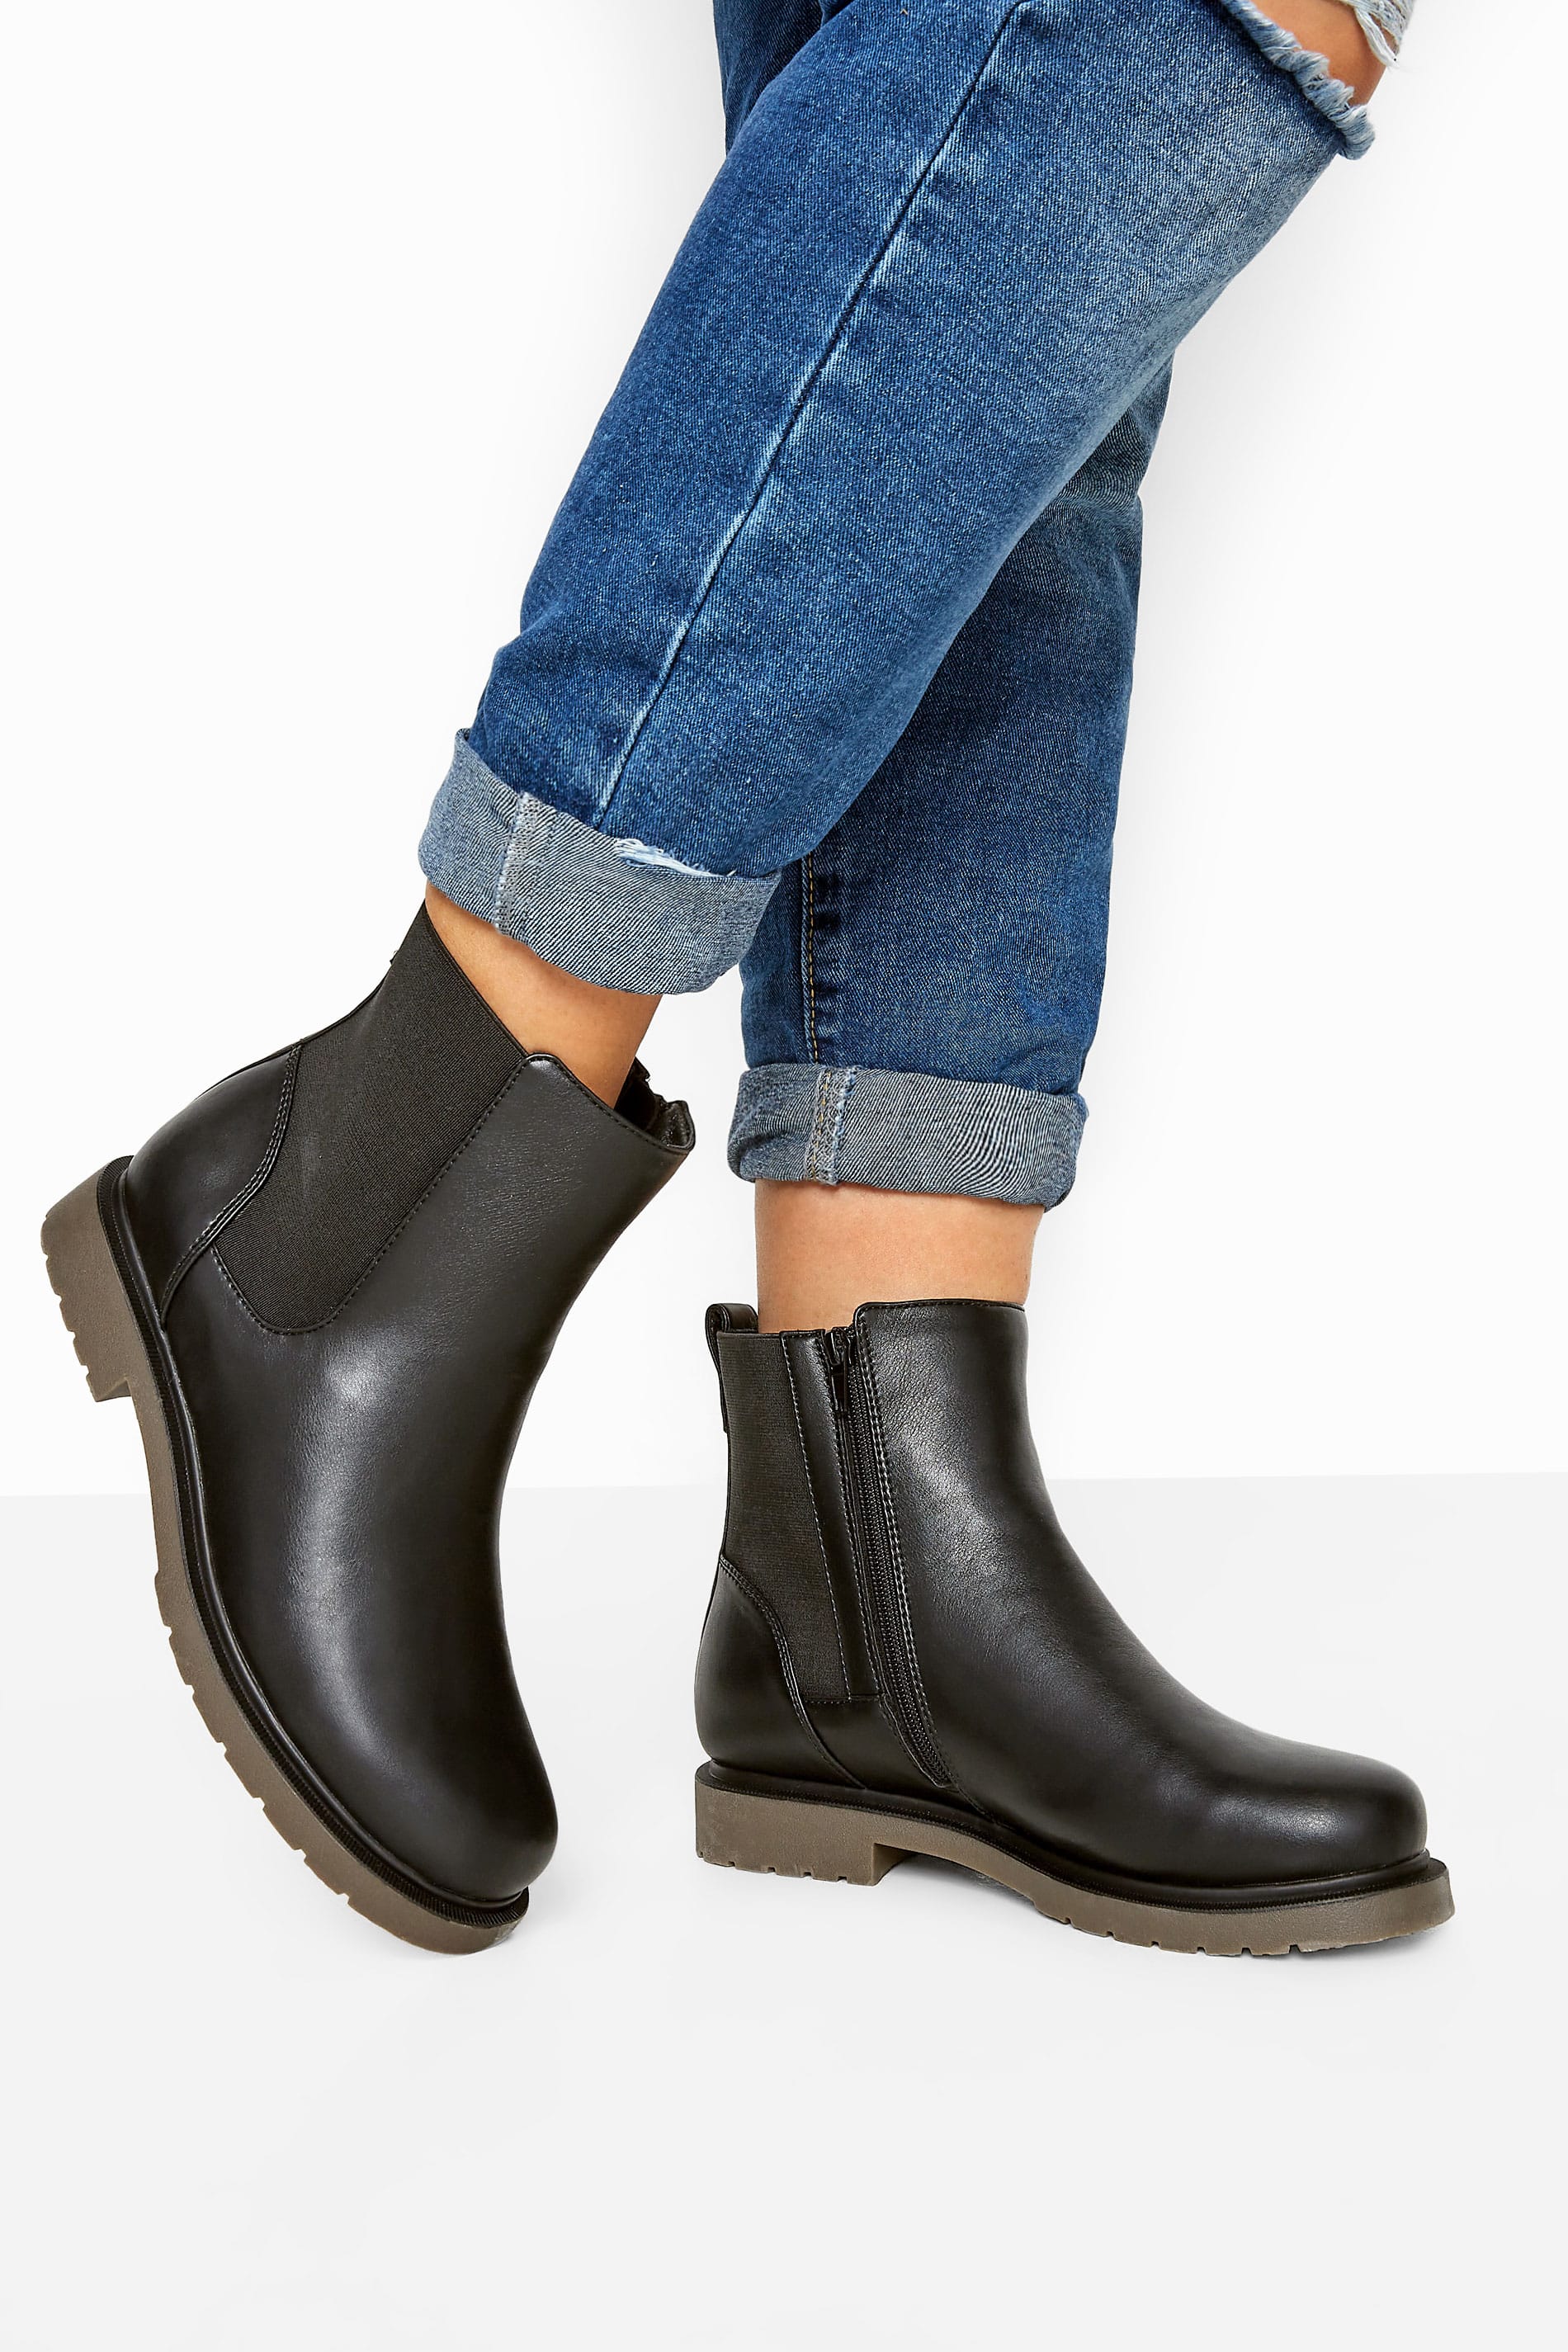 Black Vegan Faux Leather Chunky Chelsea Boots In Extra Wide EEE Fit_3f34.jpg